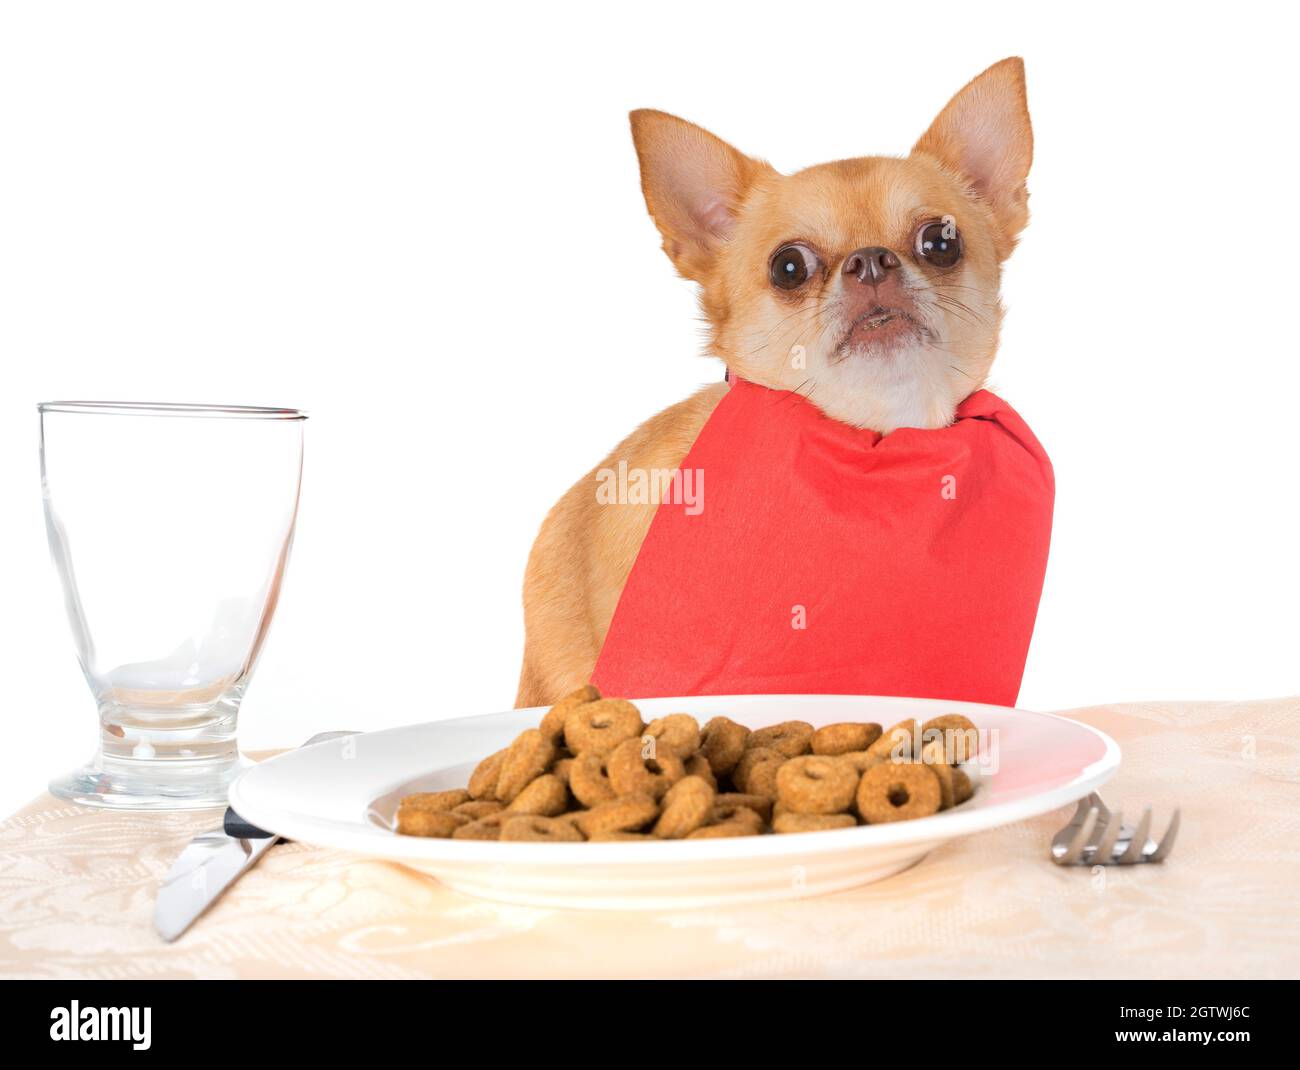 Portrait Of Dog With Food In Plate Sitting Against White Background Stock Photo